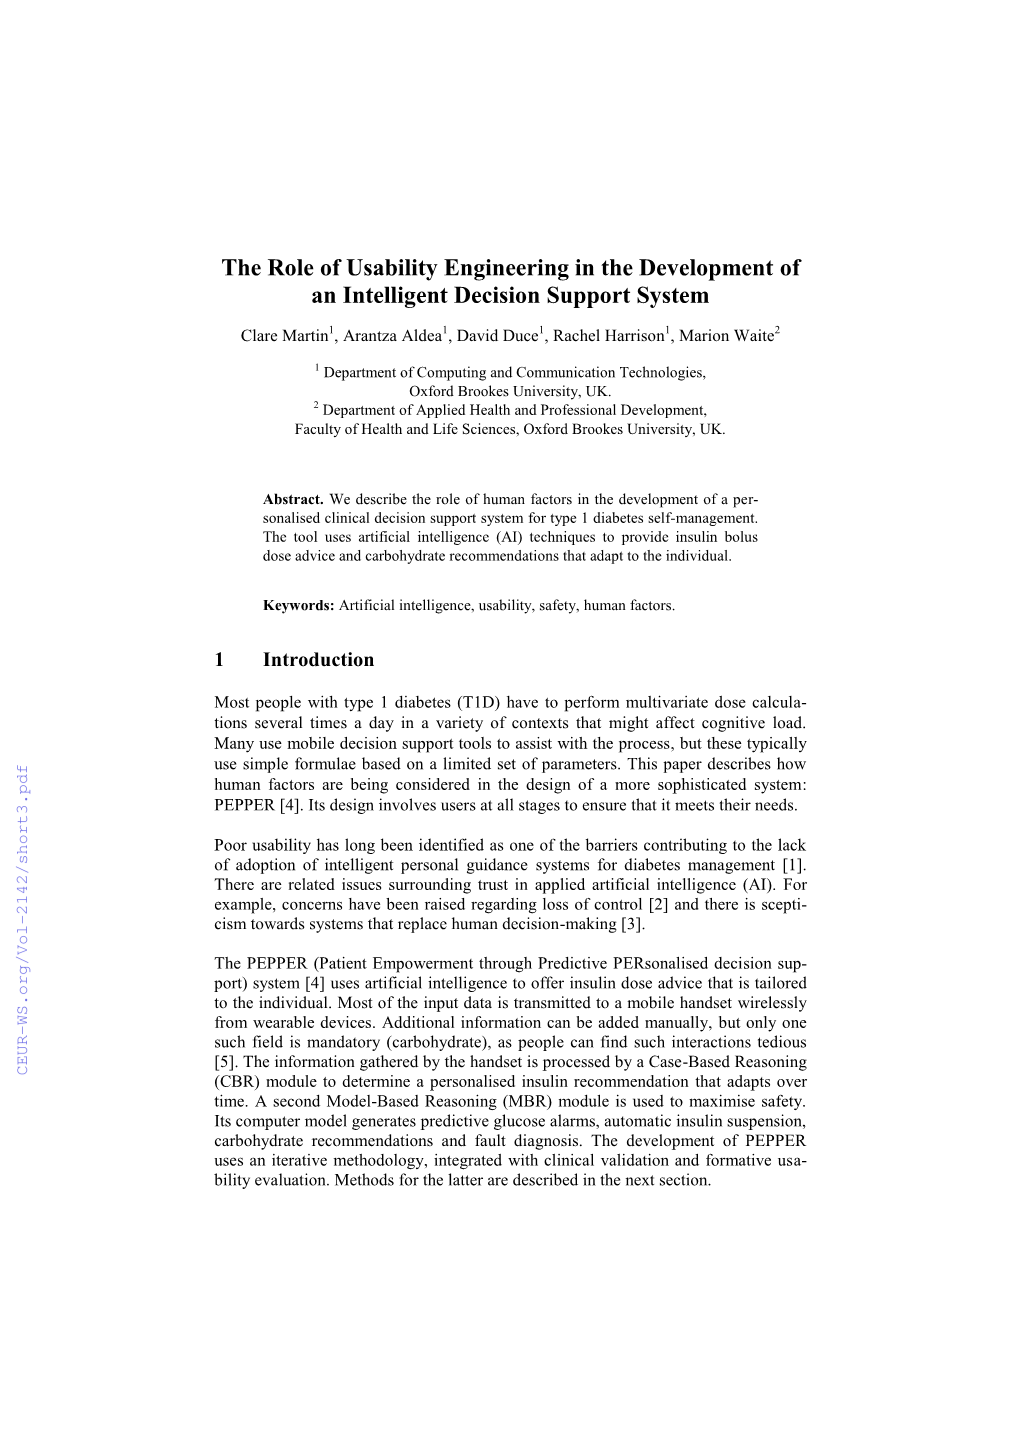 The Role of Usability Engineering in the Development of an Intelligent Decision Support System